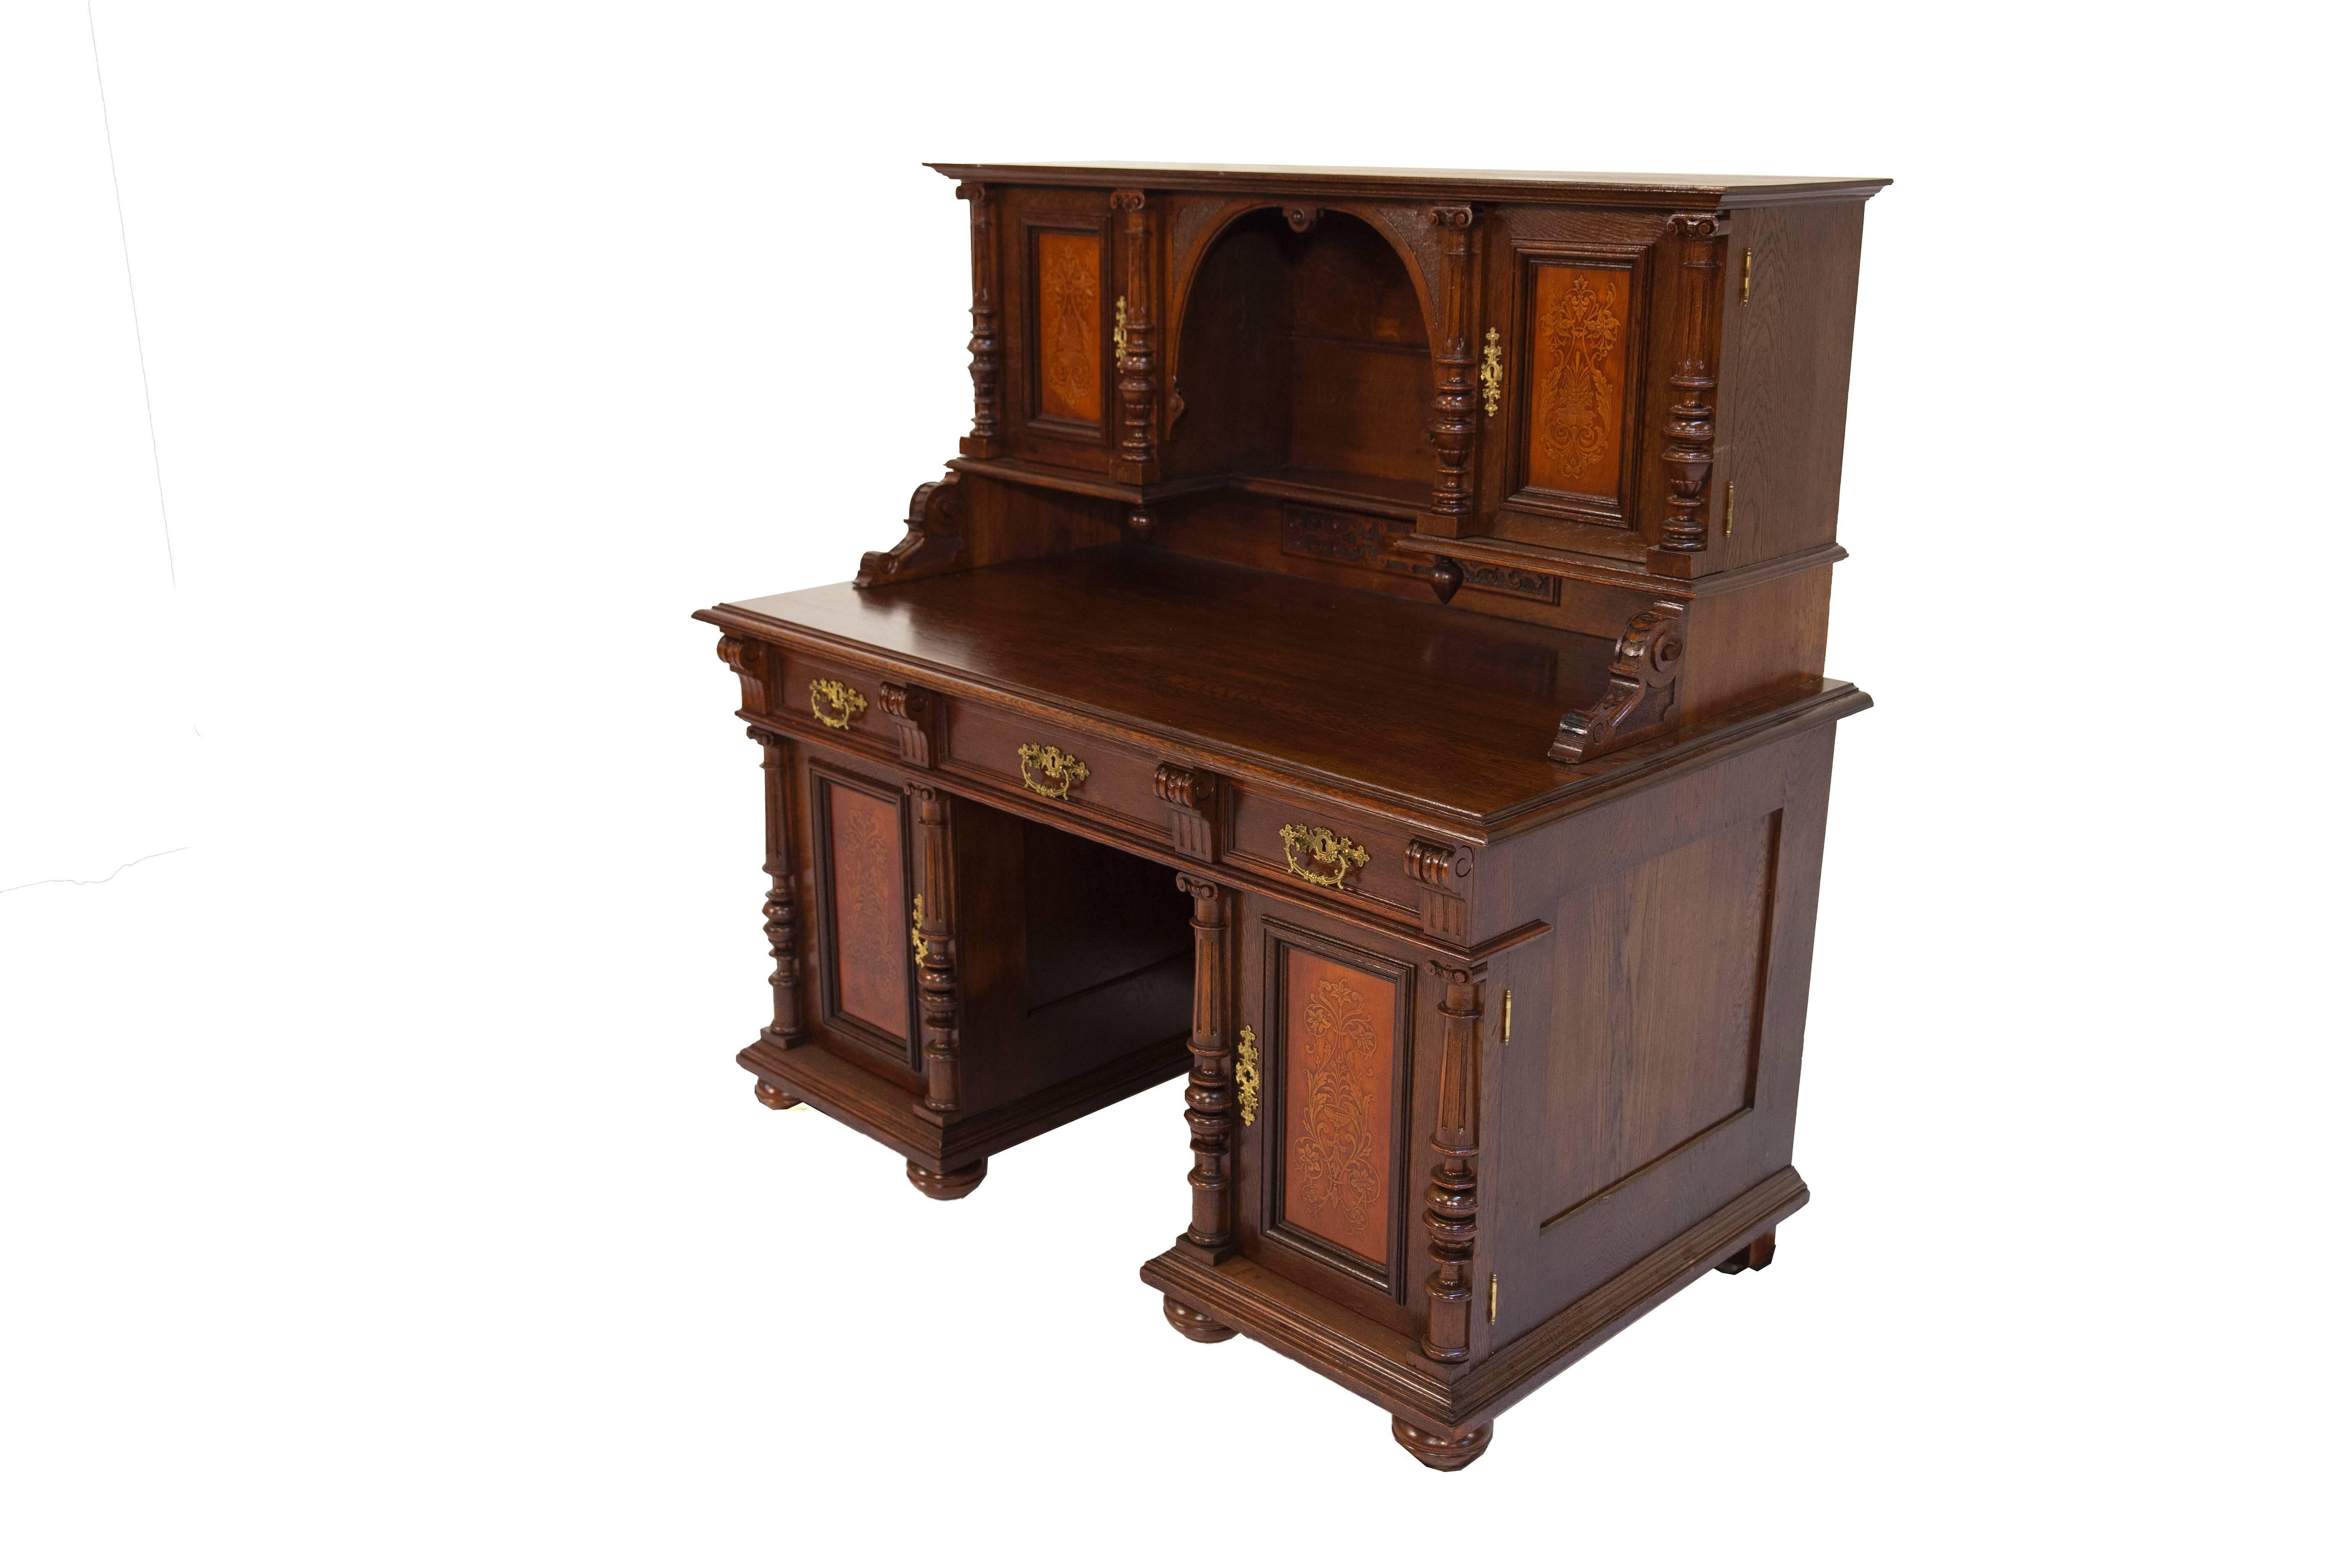 Below its writing surface, the writing desk has three drawers that can be locked. The writing surface rests on two blocks of drawers, and these are closed by doors. The cut-outs of the door are coffered and inlaid with ornamented panels. Behind the